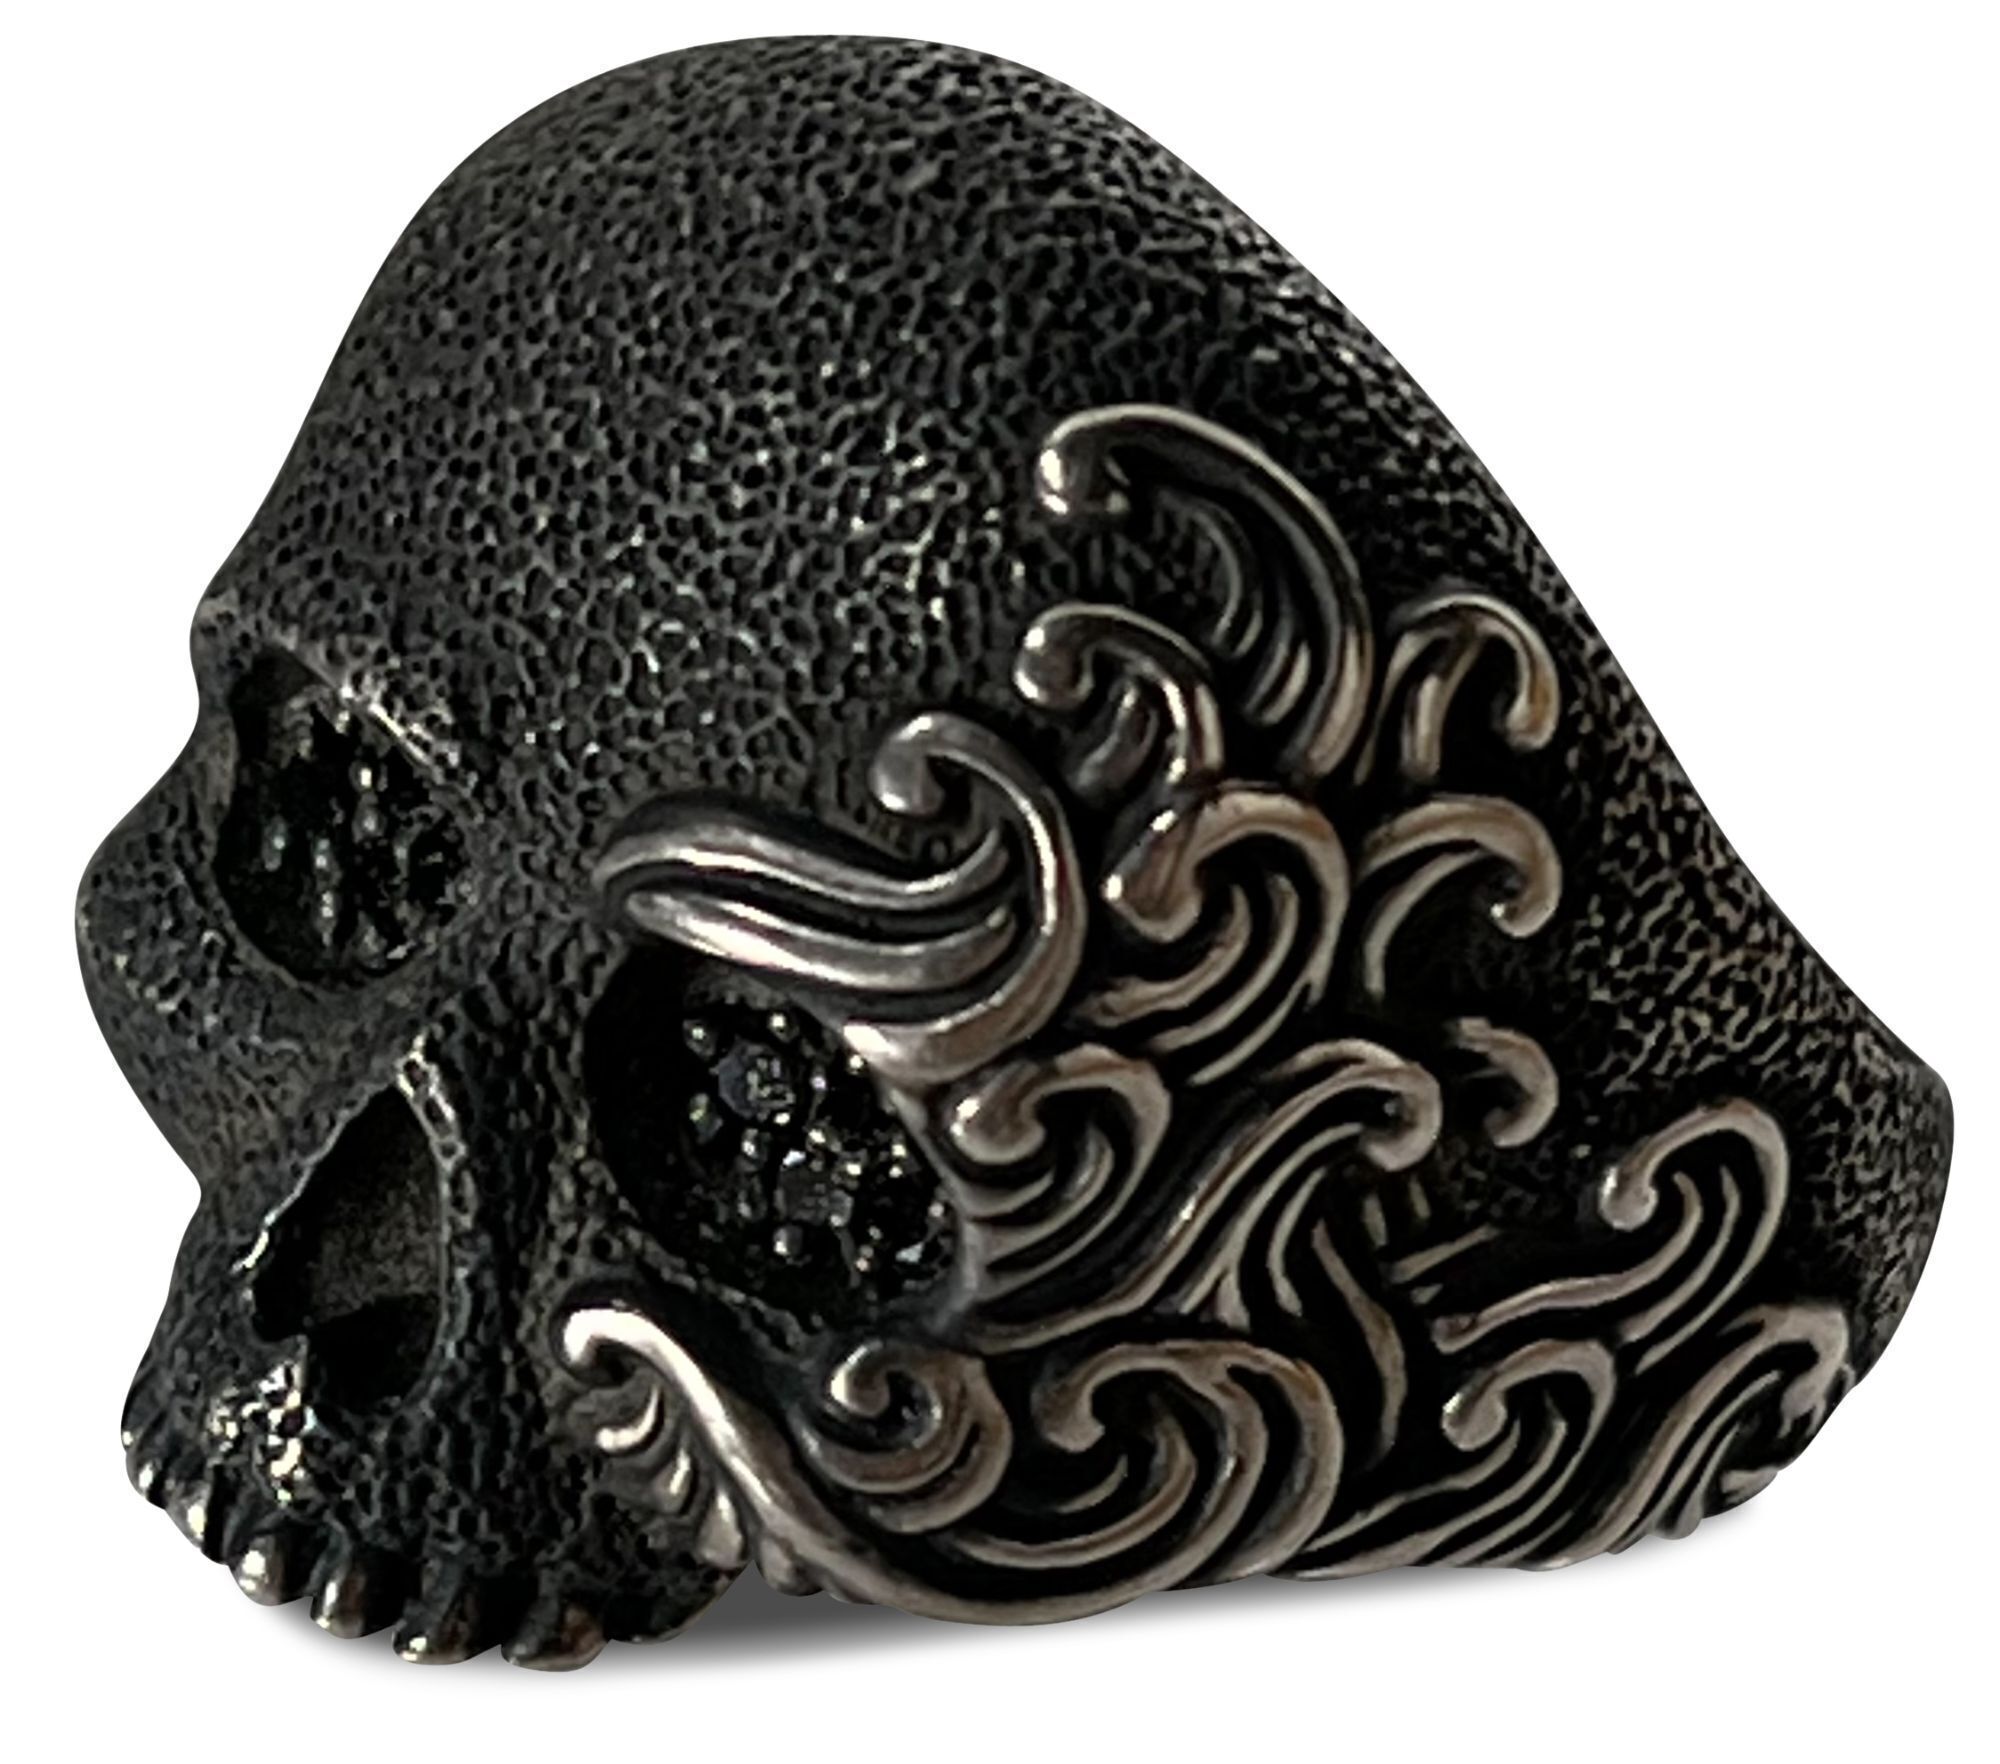 David Yurman Waves Skull Ring with Pave Black Diamonds in Sterling Silver - 4